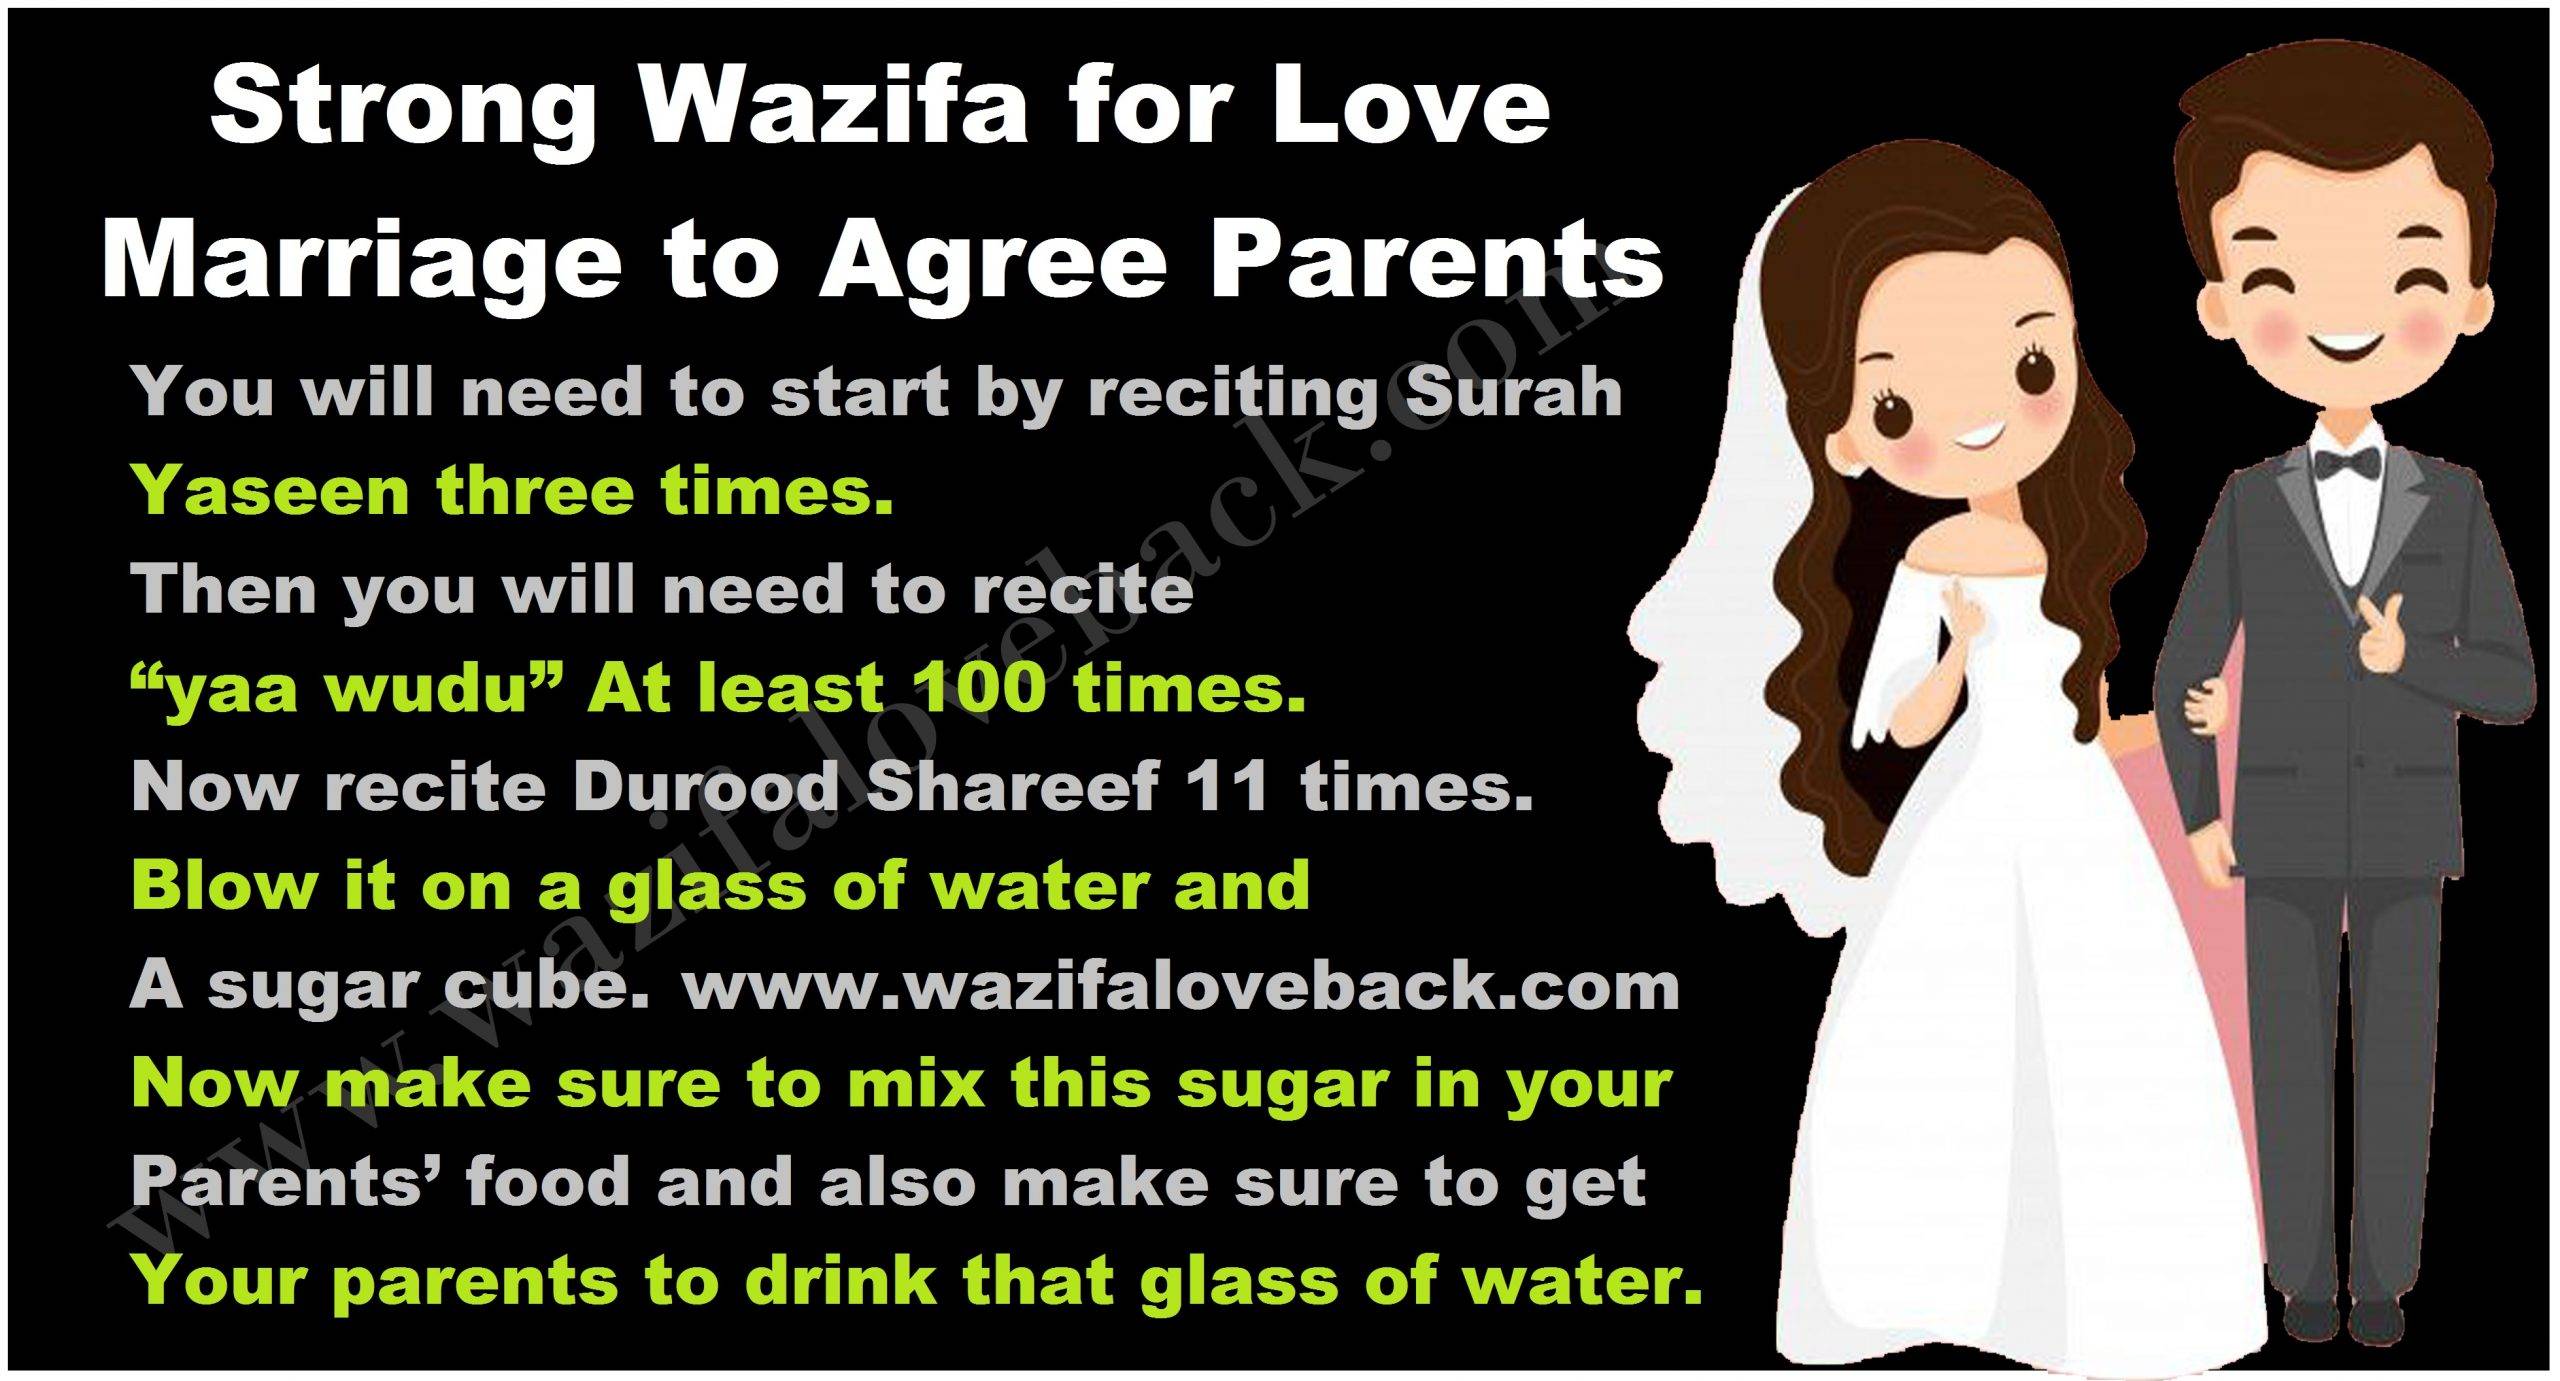 Wazifa for Love Marriage to Agree Parents